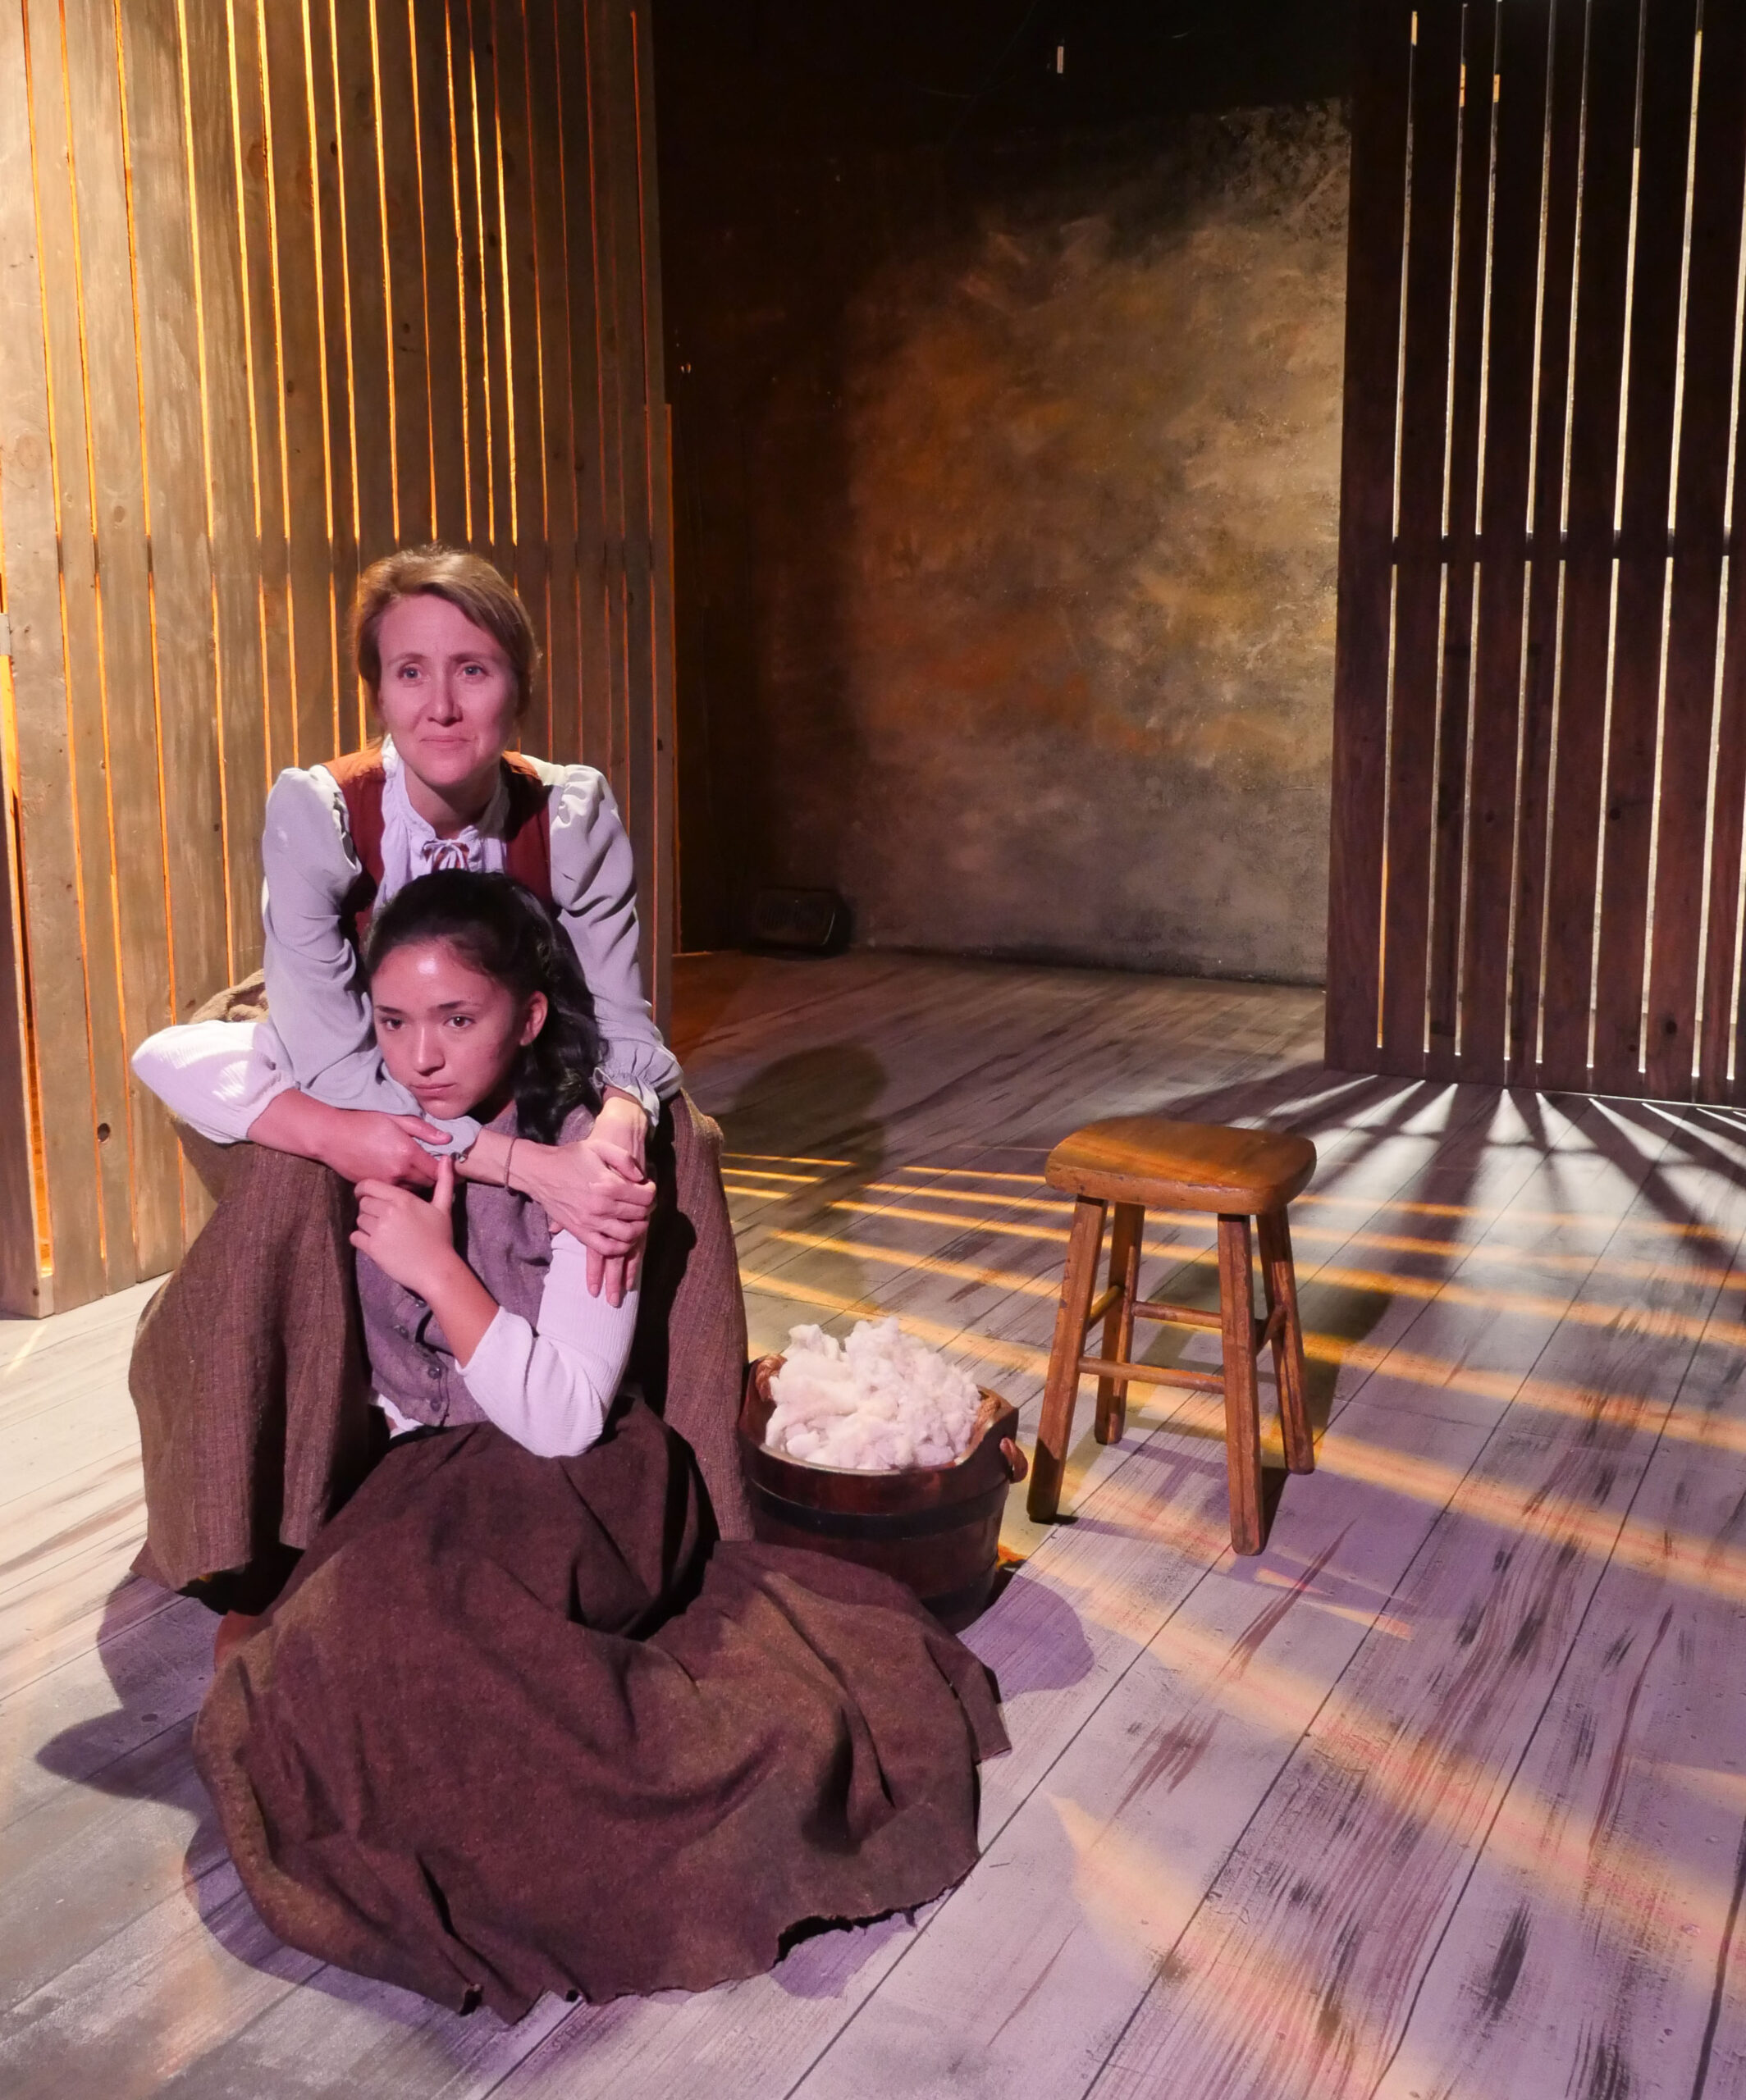 “MOTHER OF THE MAID” at Moxie Theatre